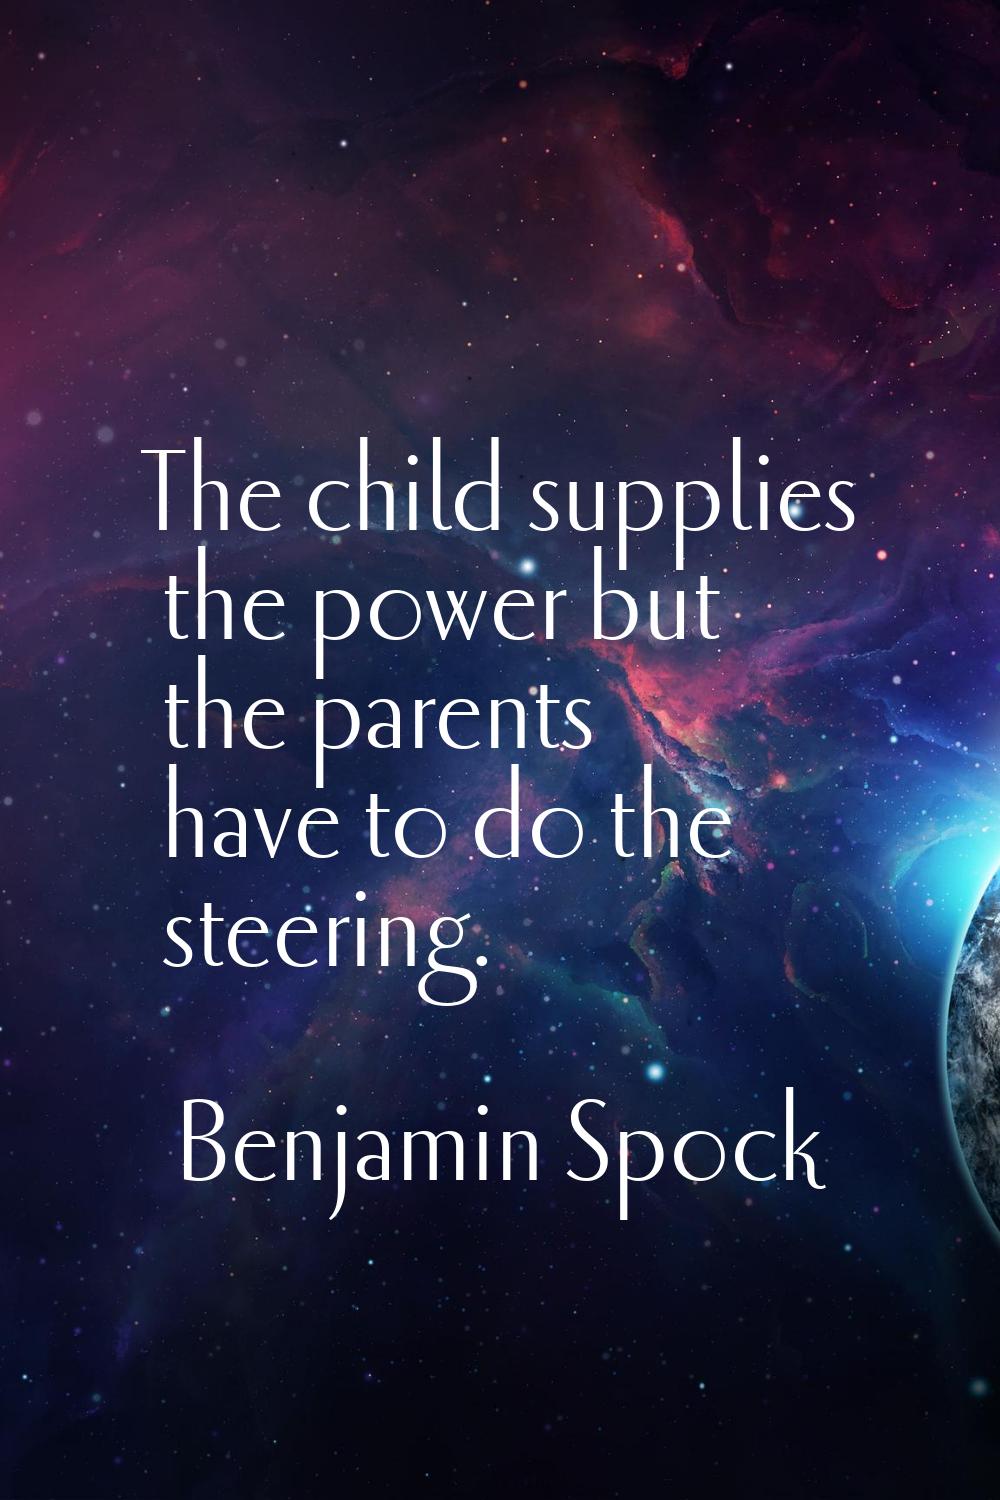 The child supplies the power but the parents have to do the steering.